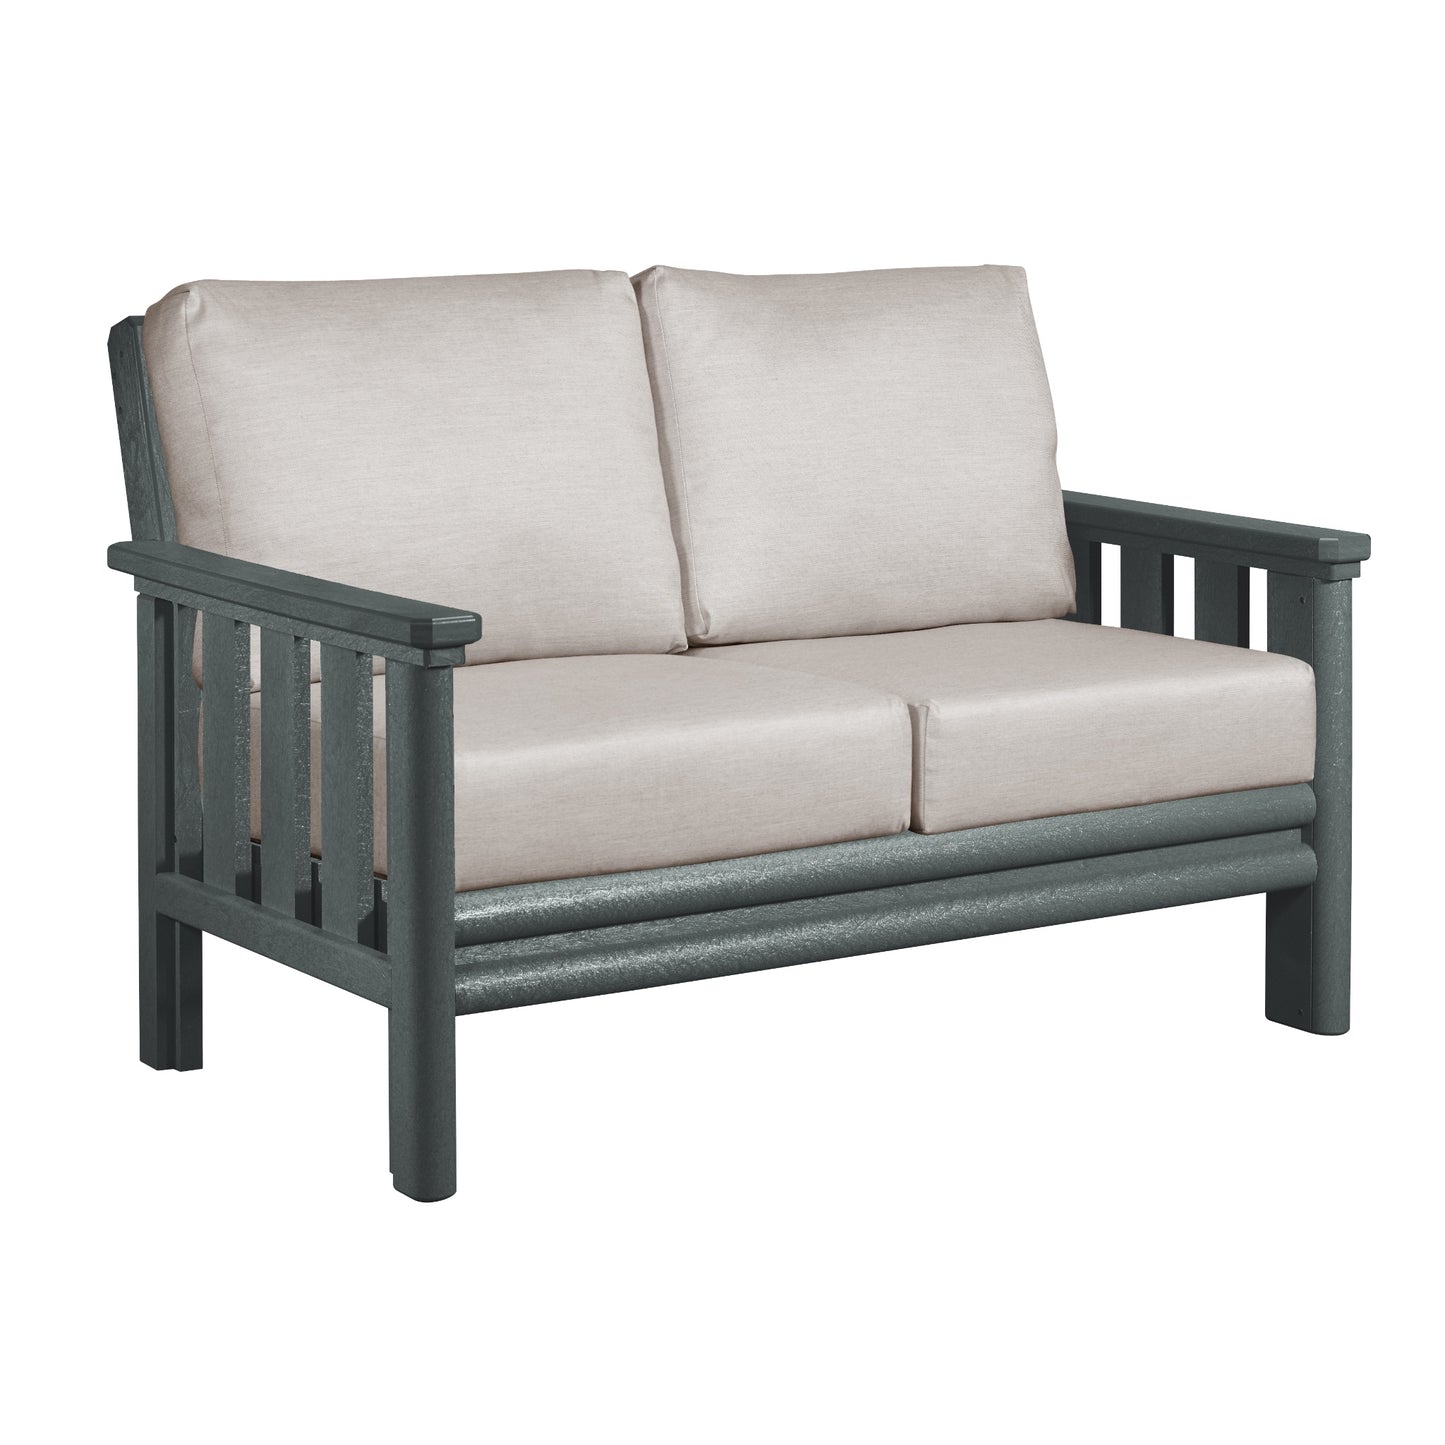 Stratford Loveseat SLATE GREY FRAME WITH CUSHIONS - DSF262